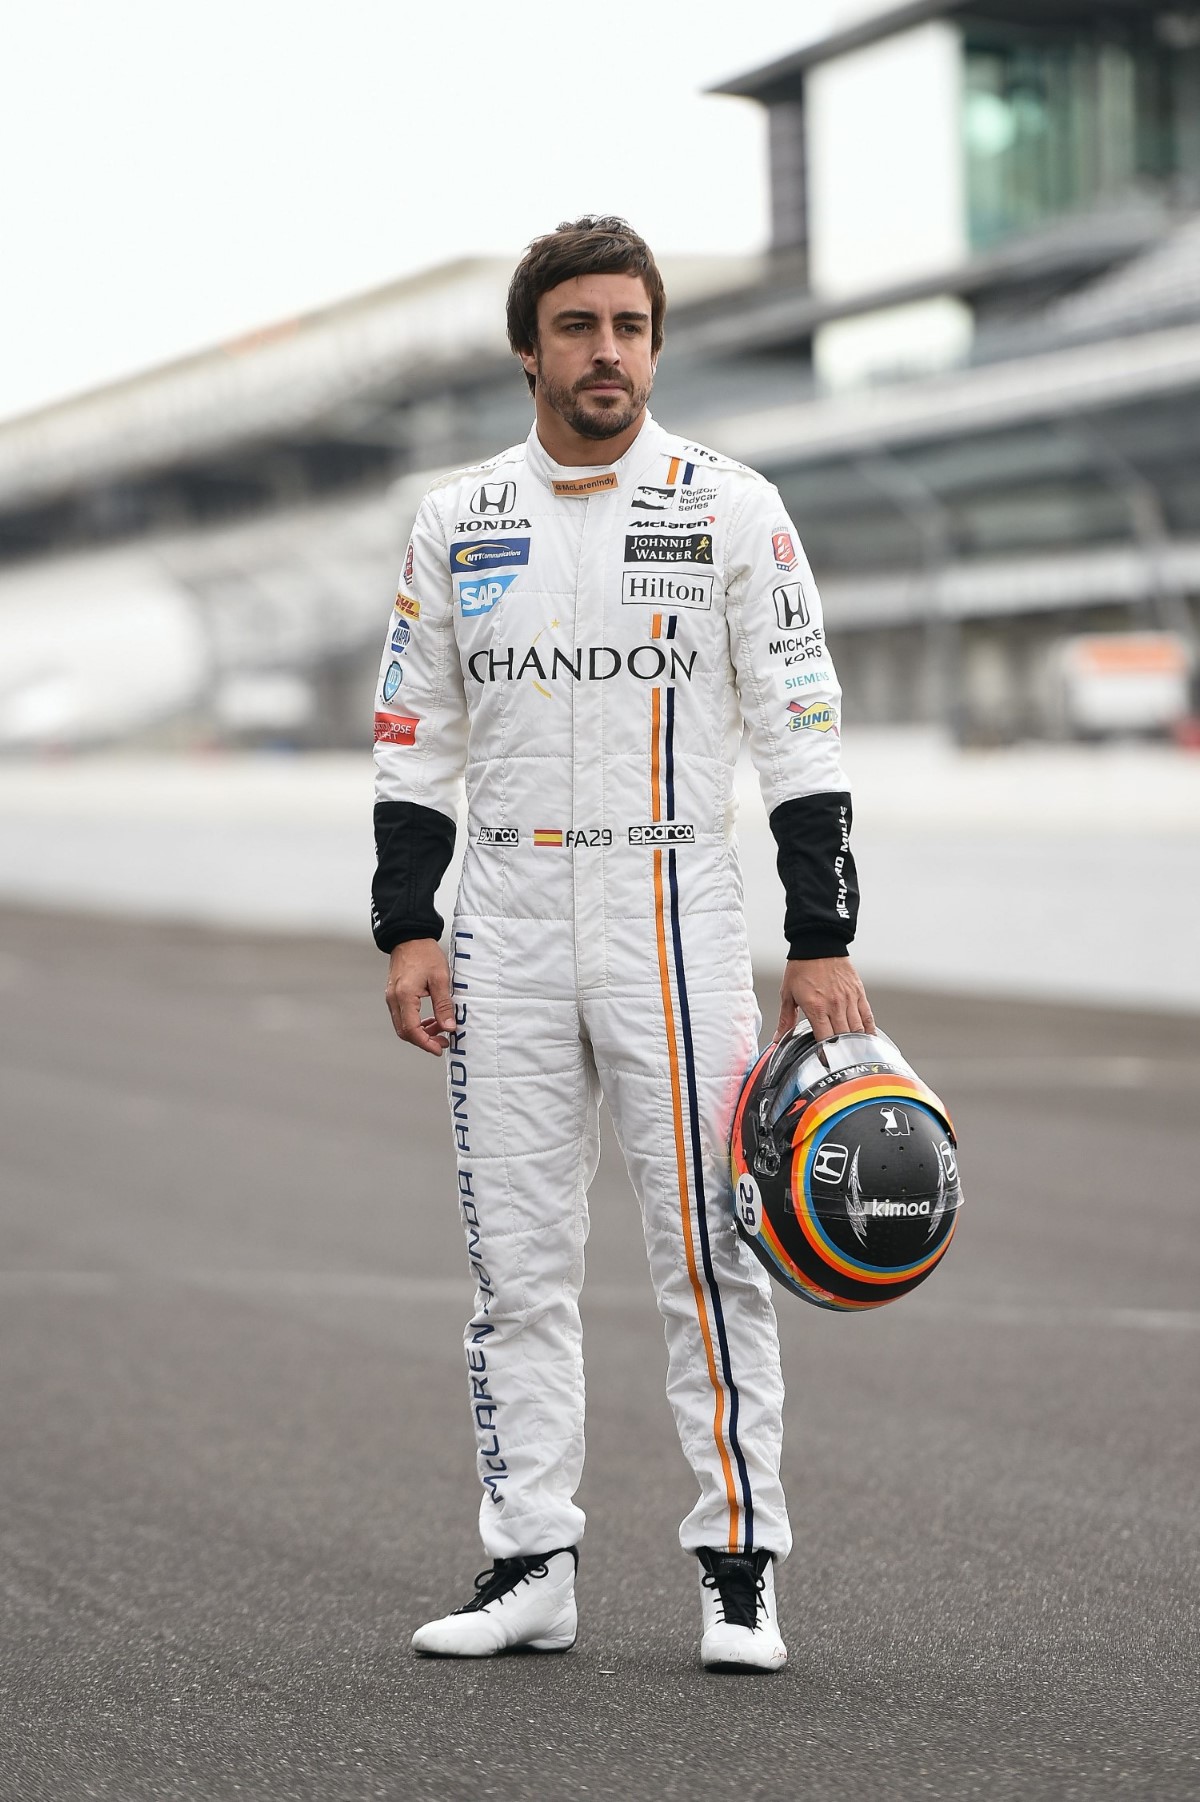 No regrets says Alonso